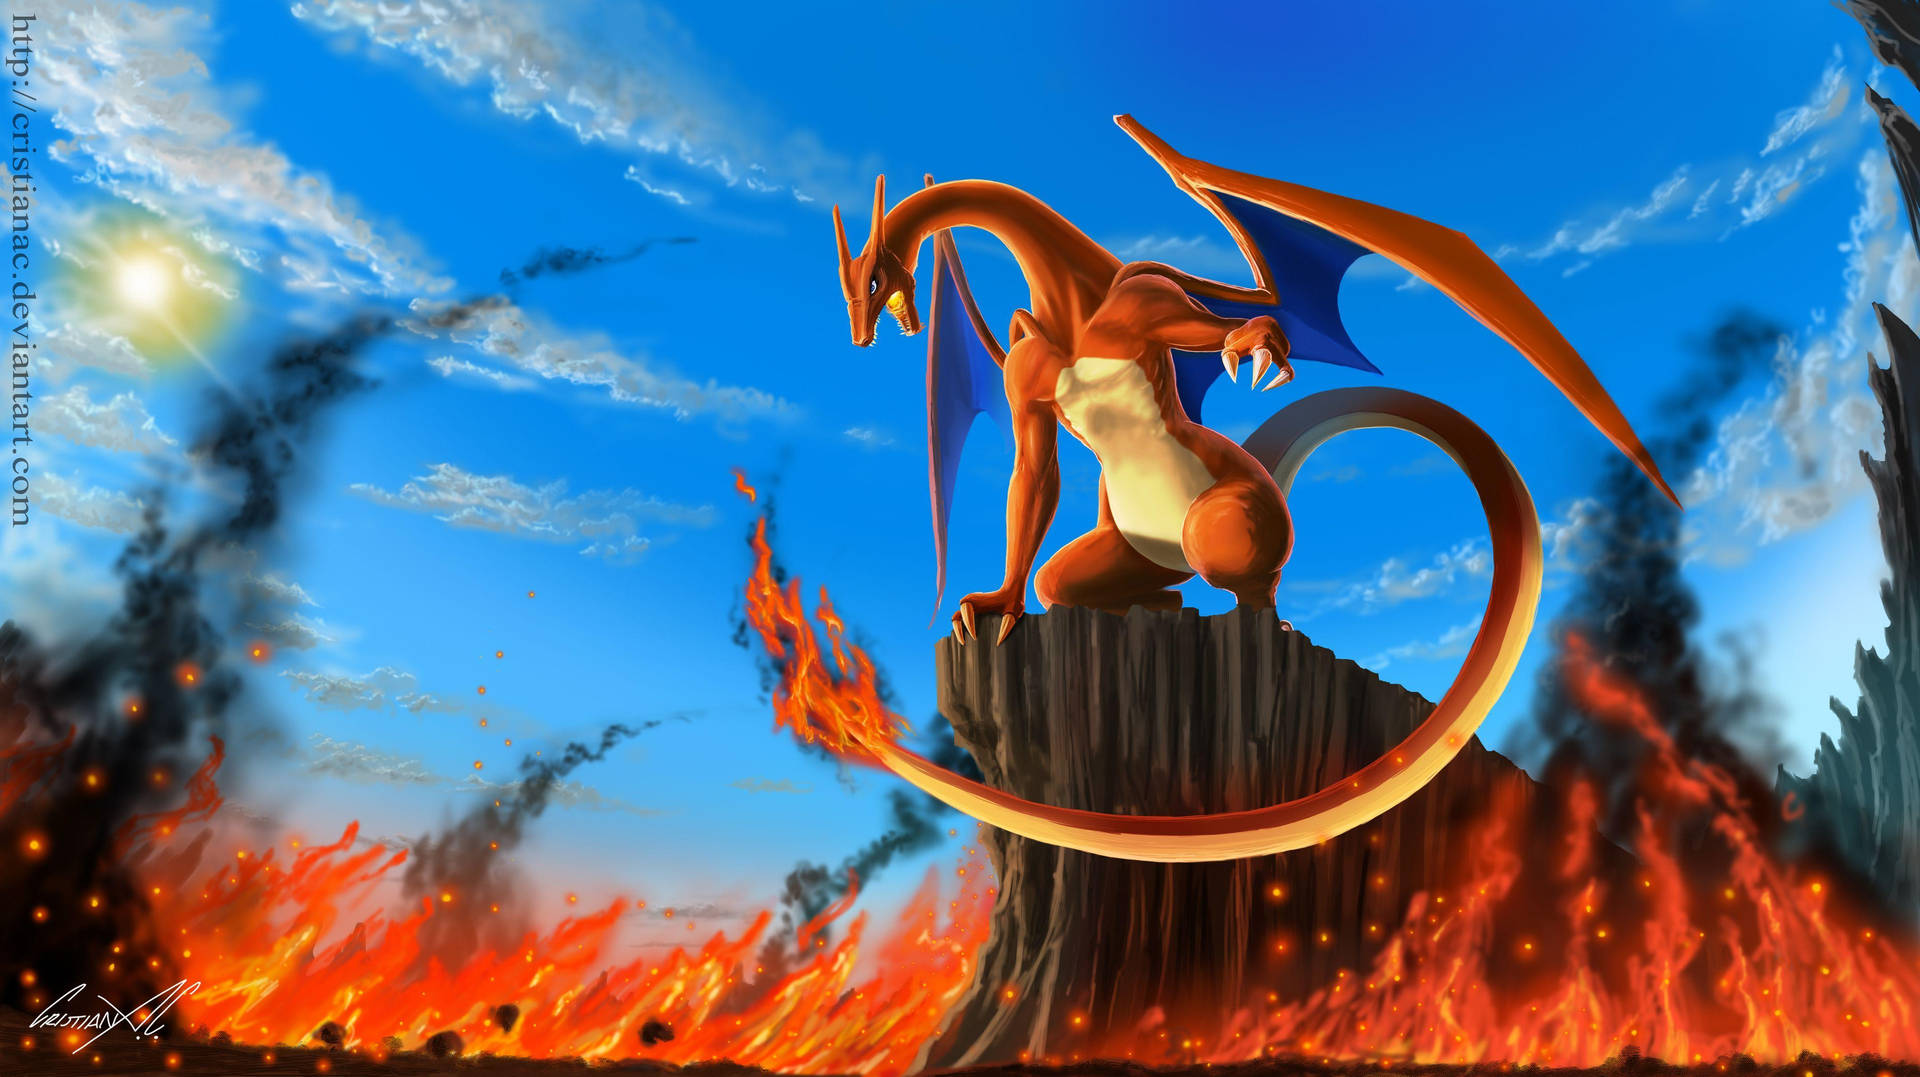 Image Majestic Charizard Breathing Fire In The Open Sky Background